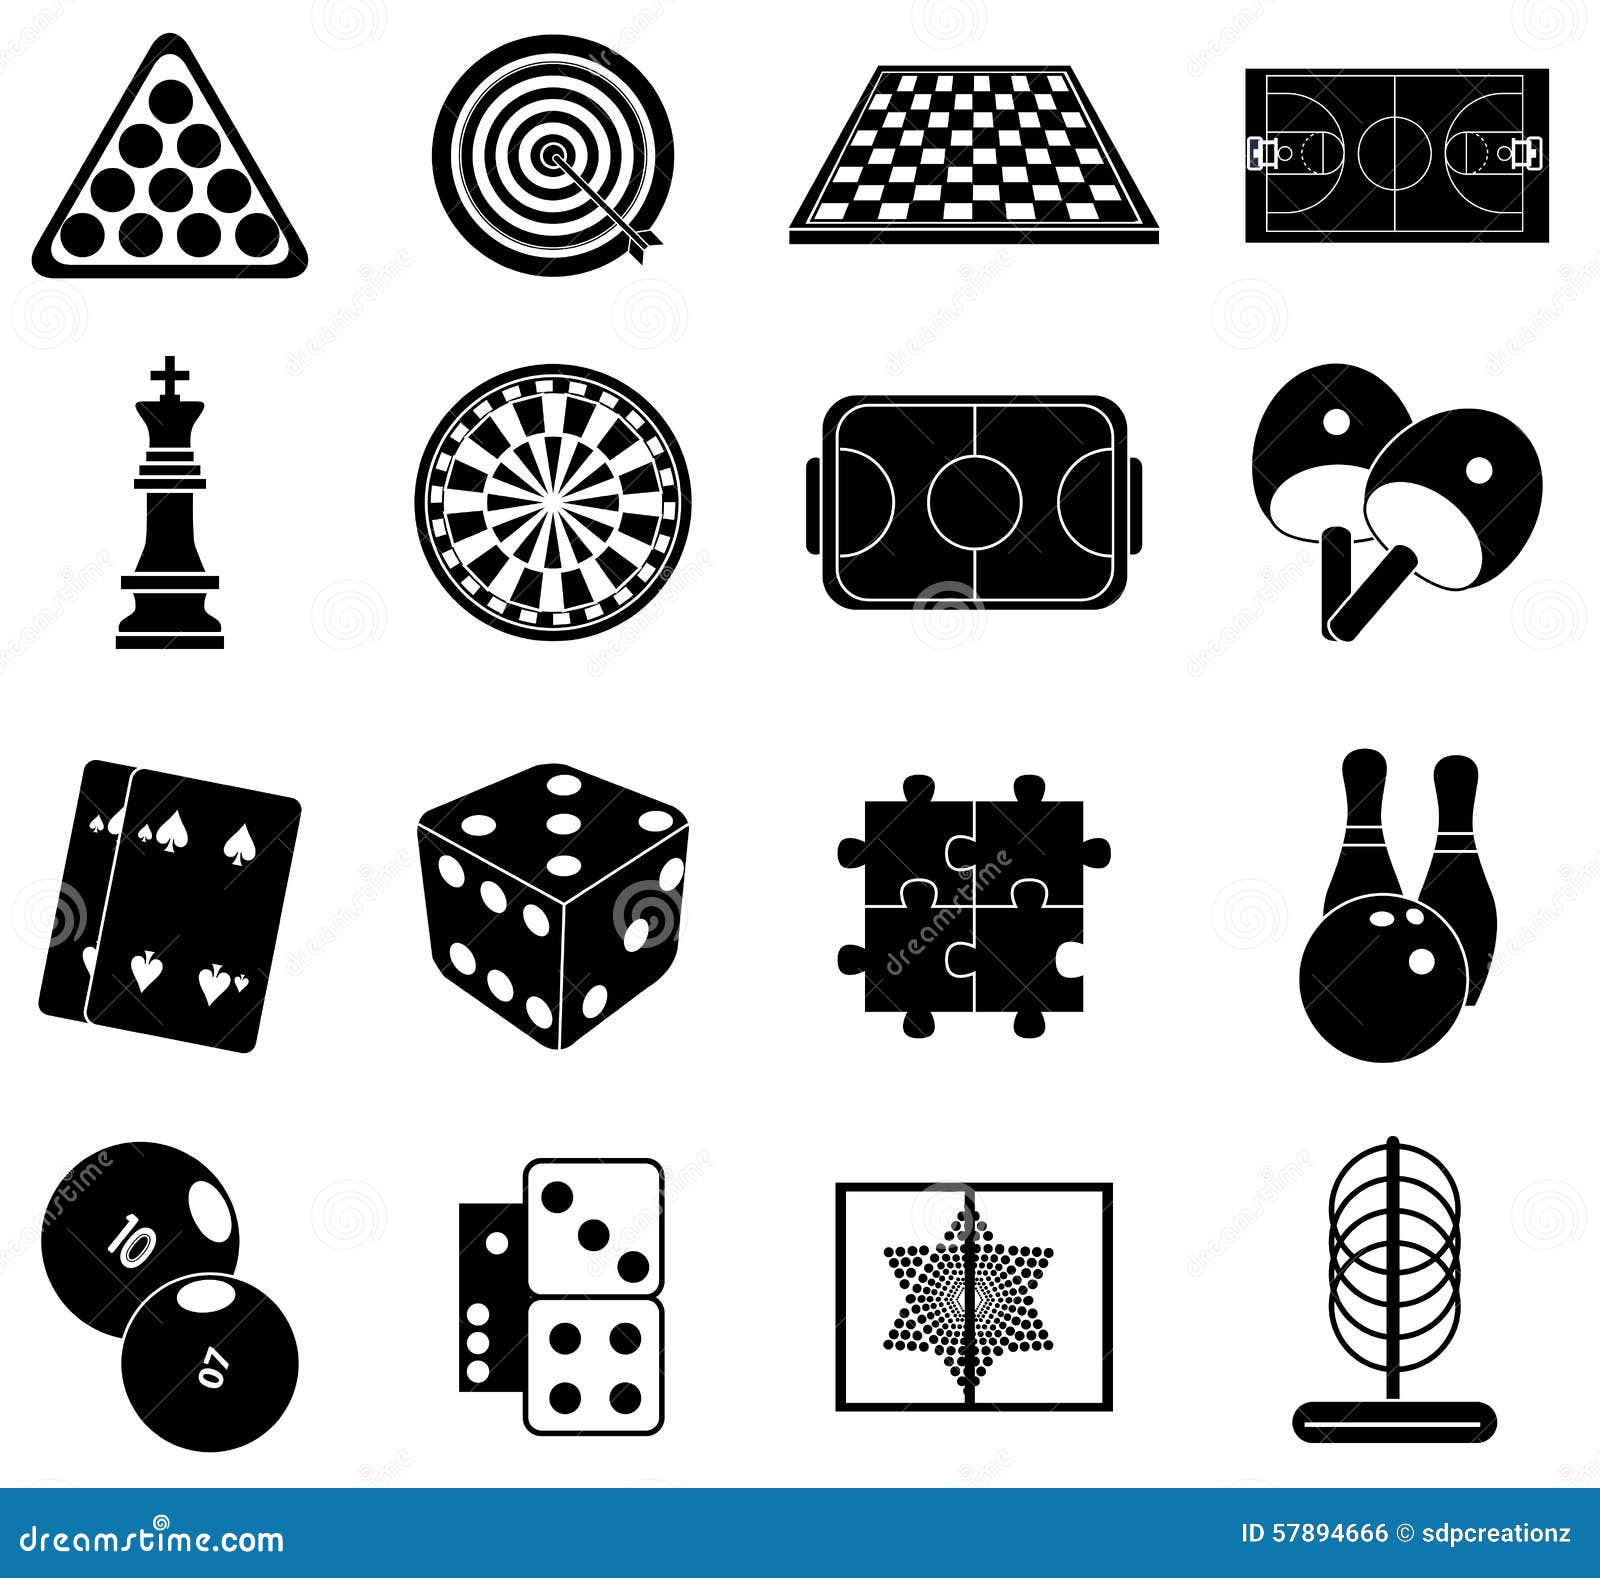 Game icons set stock vector. Illustration of casino, puzzle - 43963139